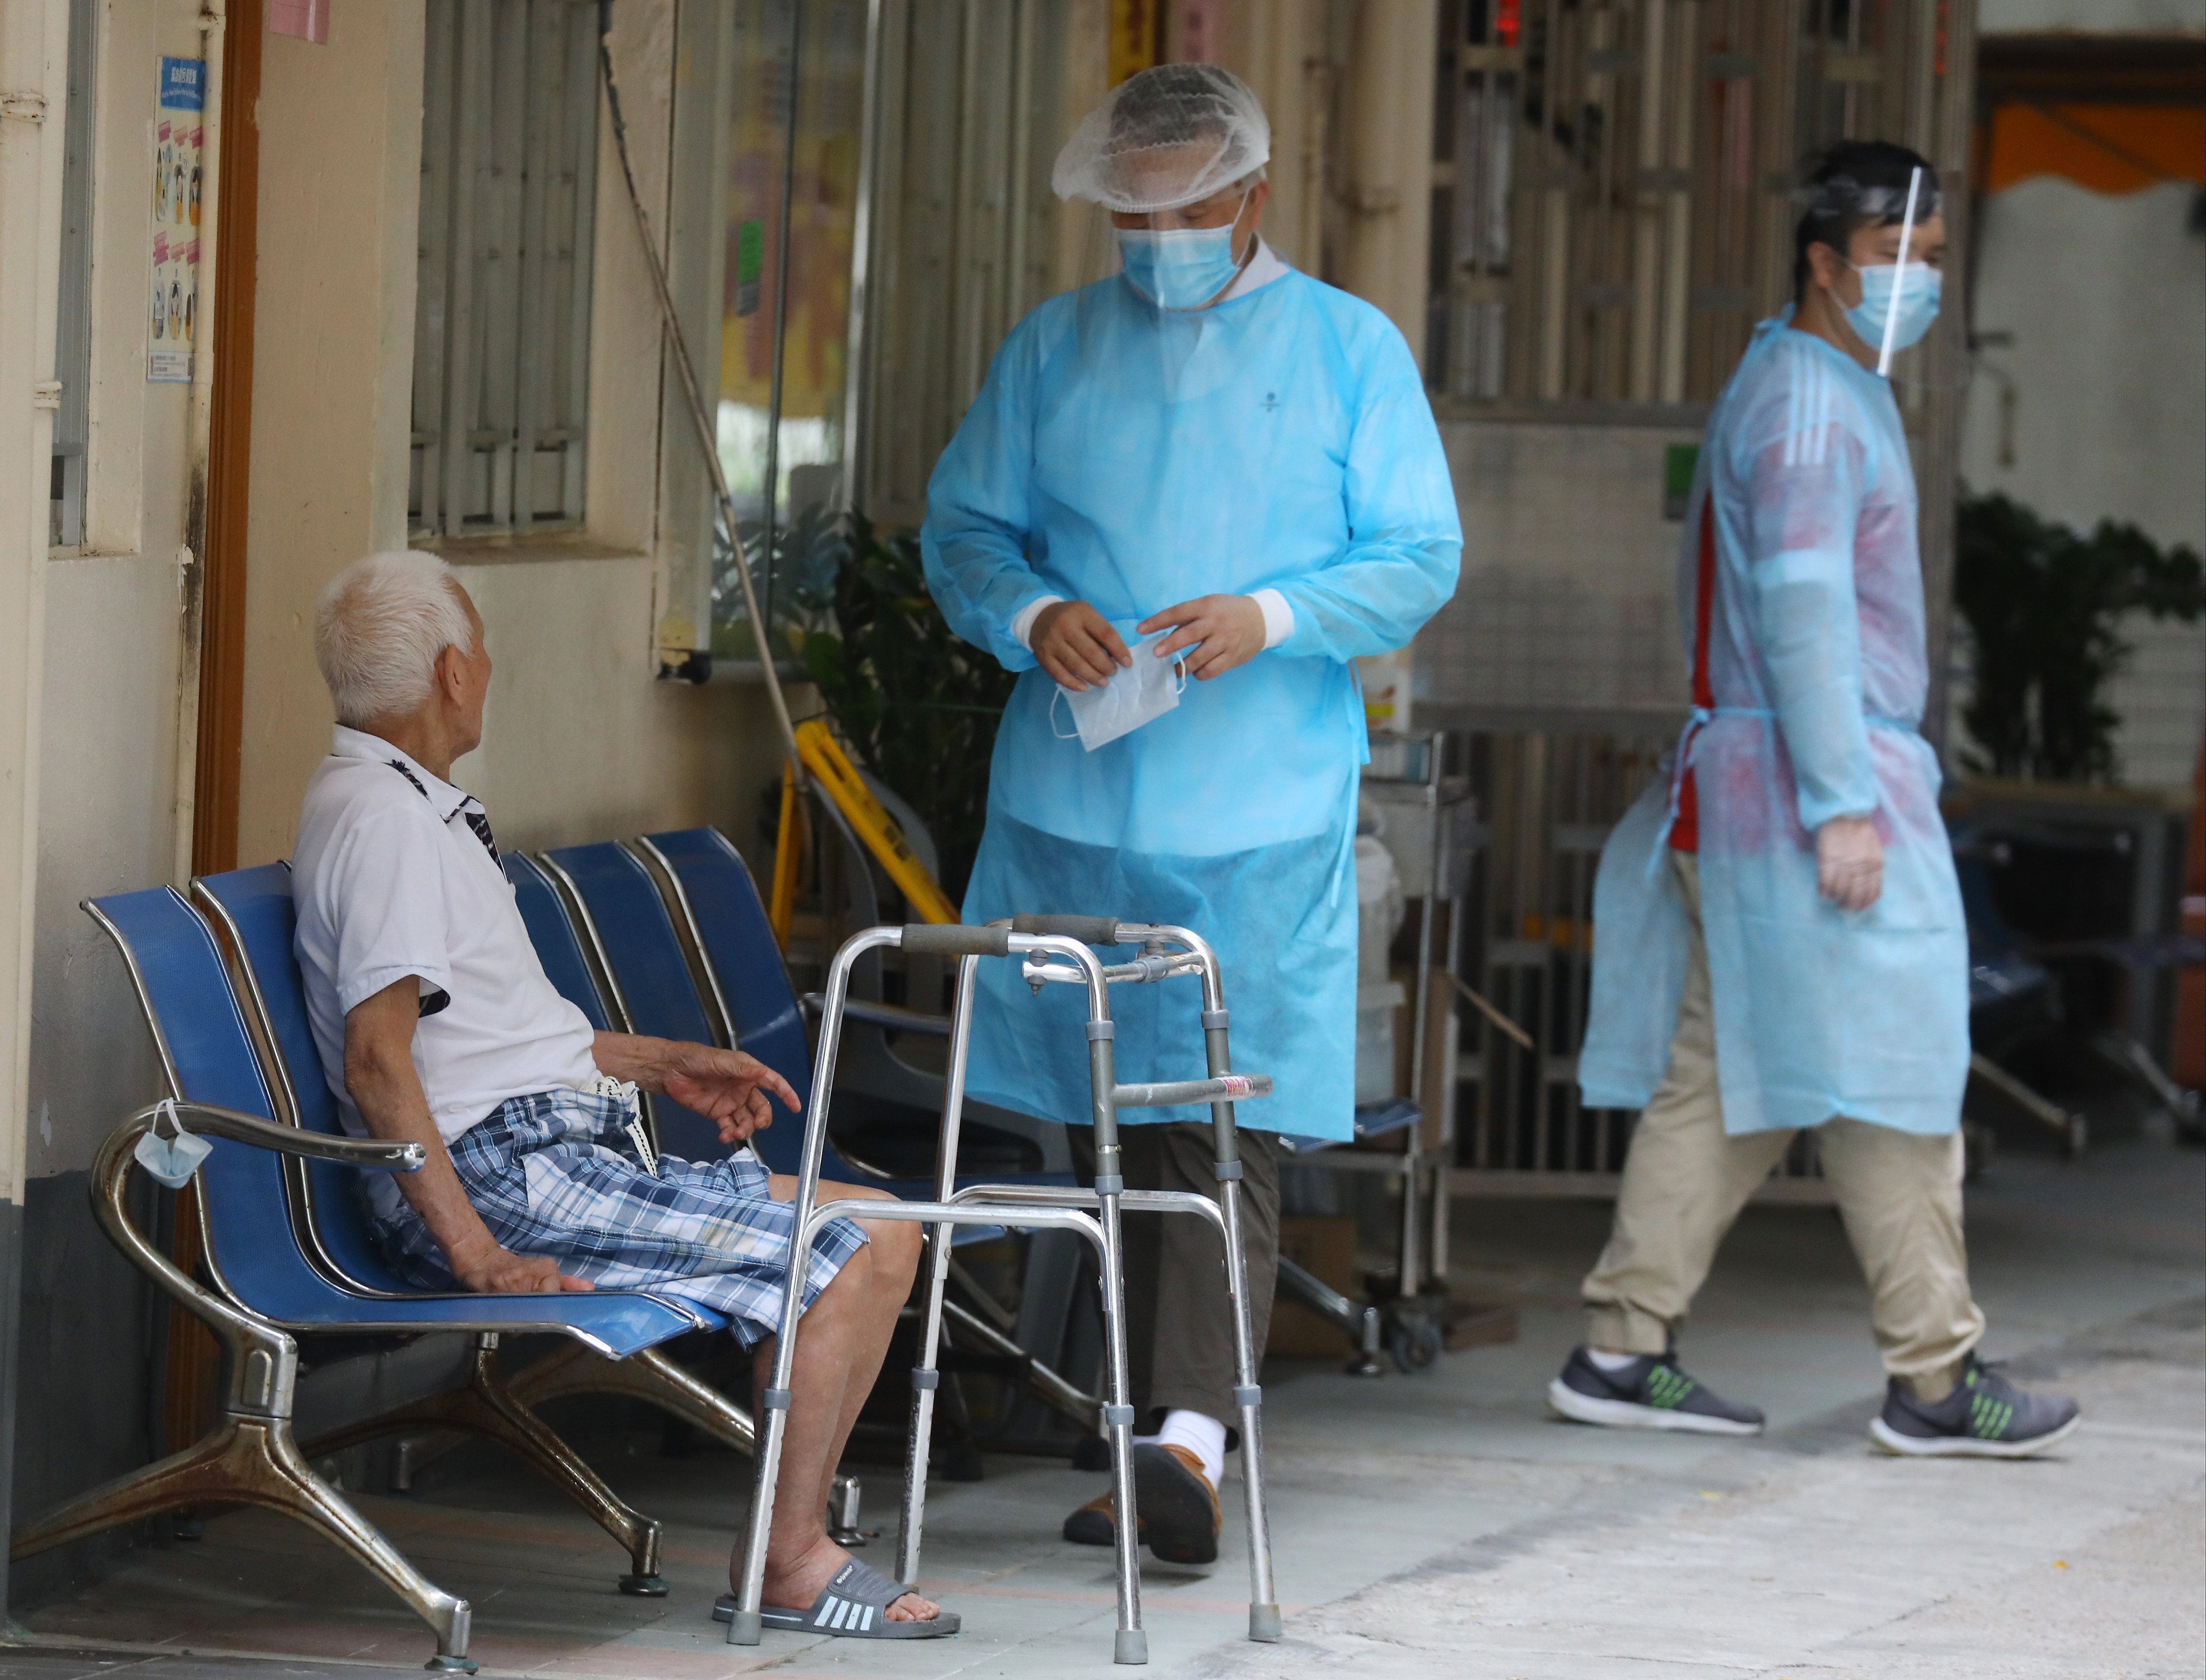 Hong Kong has an increasingly ageing population, with official projections showing the city is on track to have 2.52 million residents aged 65 or above by 2039. Photo: Dickson Lee